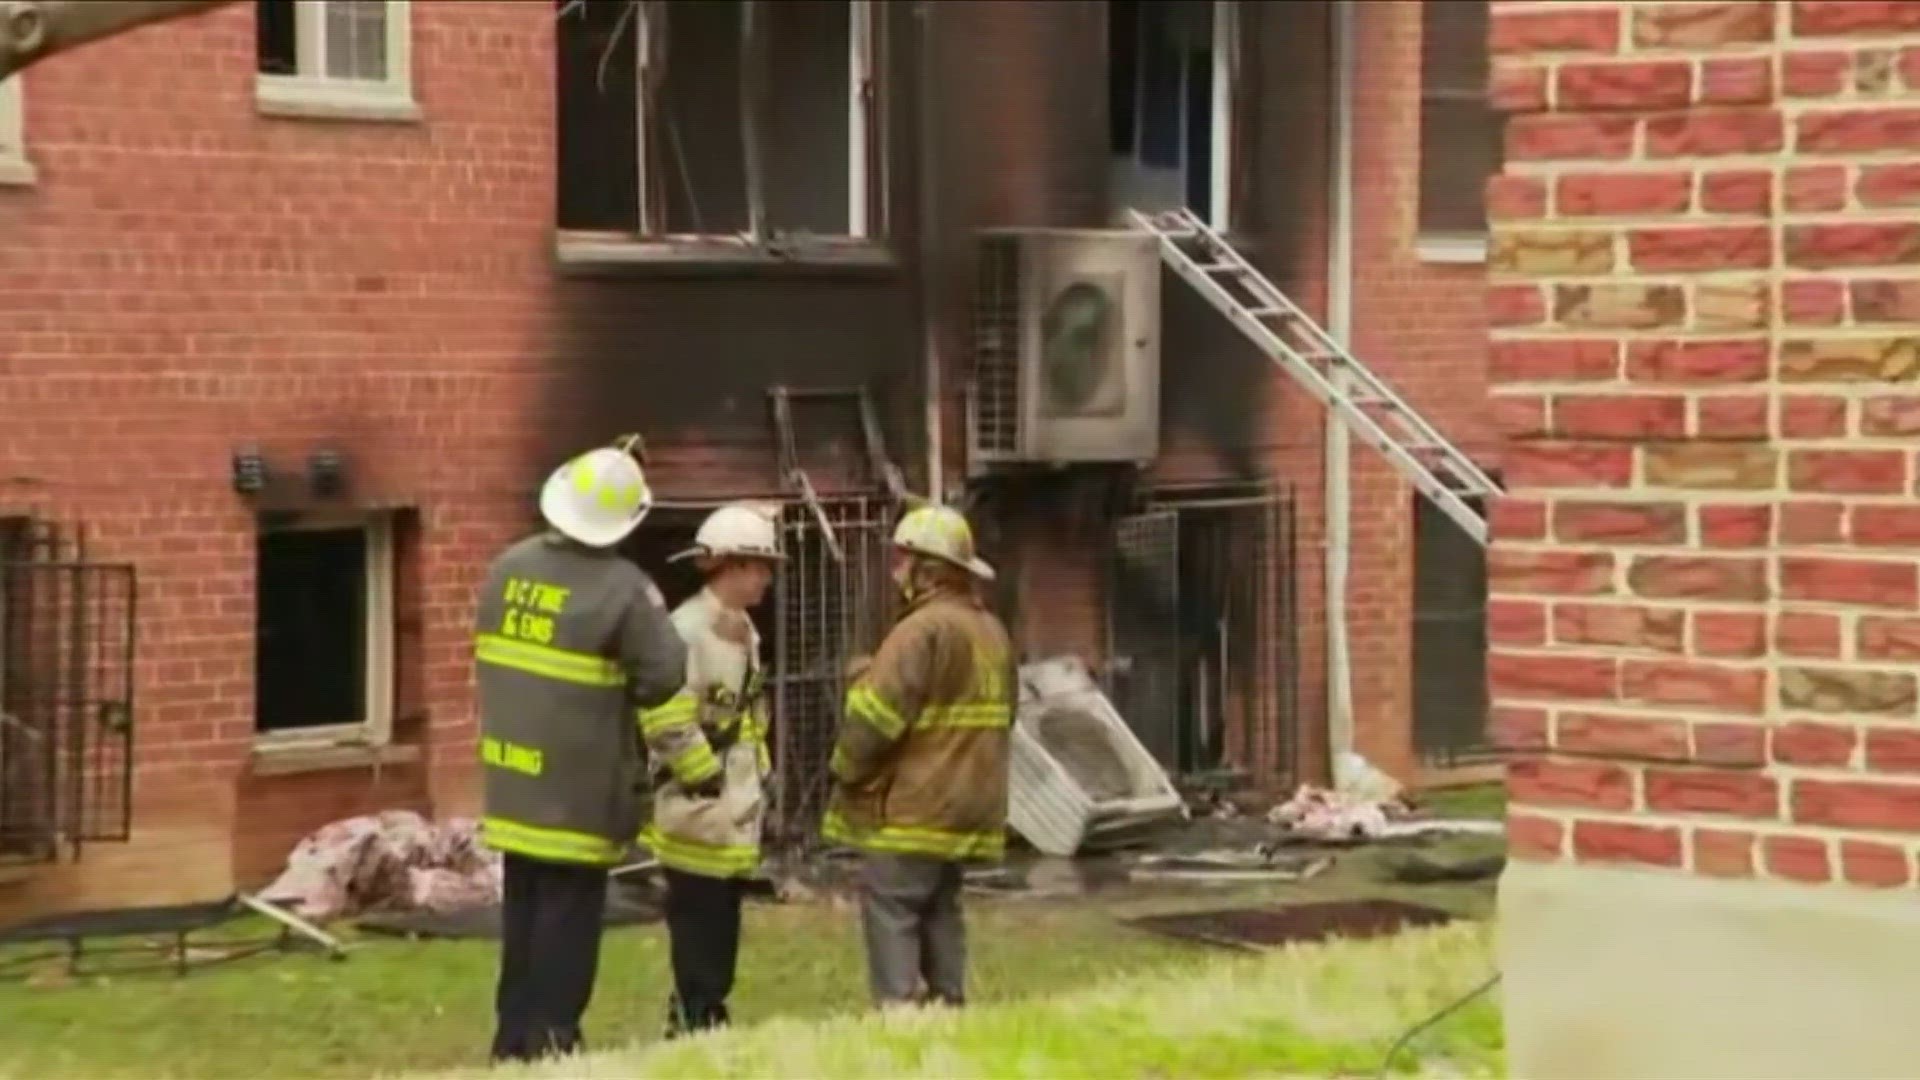 One person was critically injured, and others had to be rescued from a fire in an apartment building in Northwest D.C. on Tuesday.